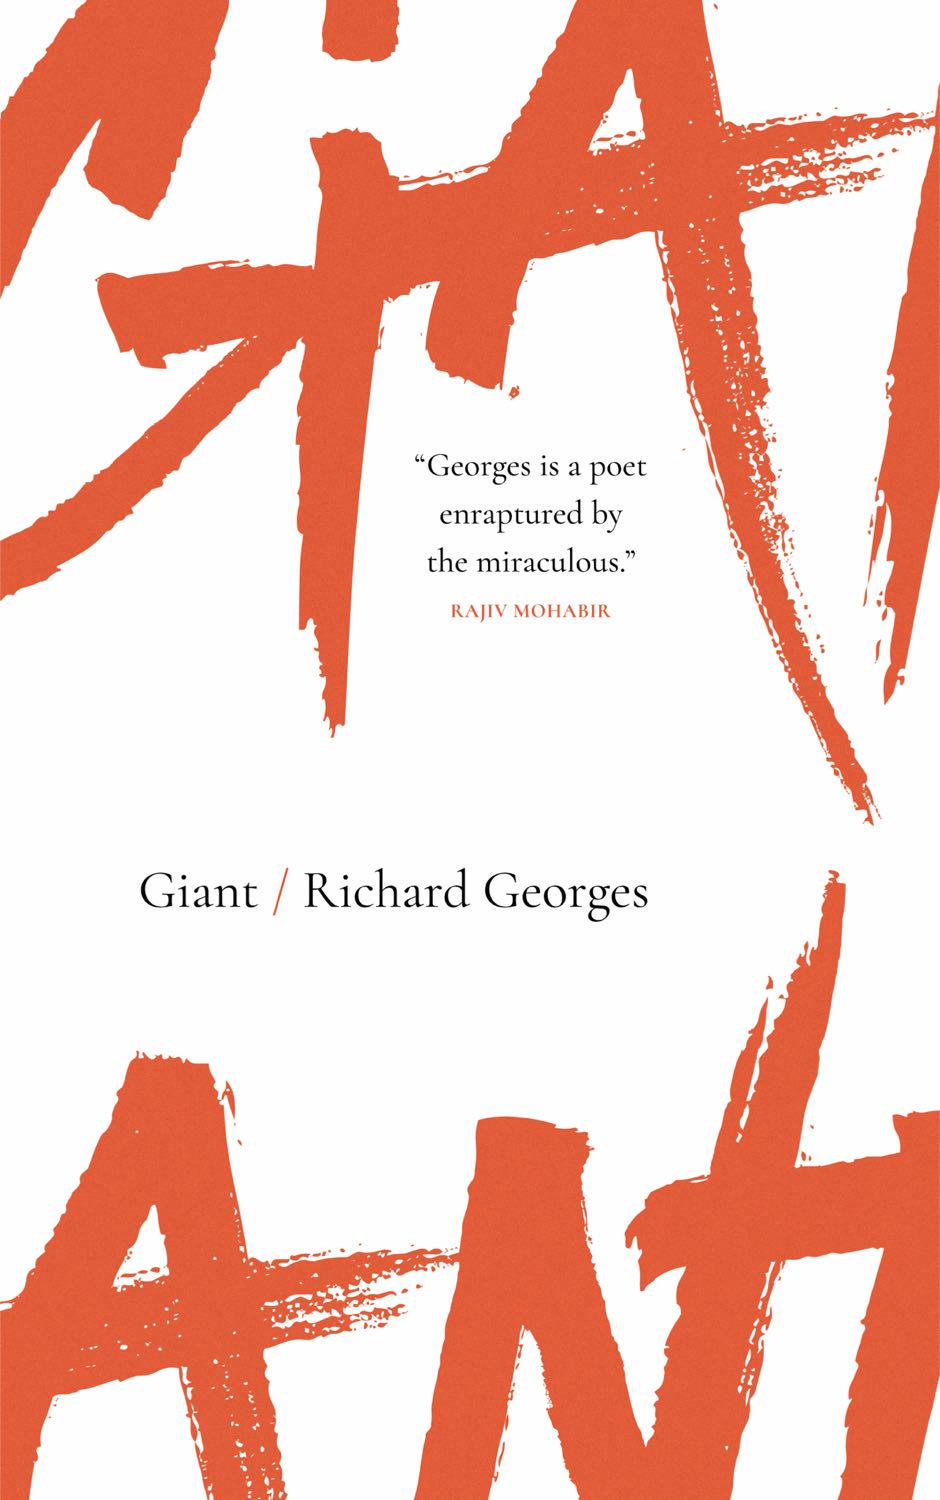 Cover features the word ‘giant’ in large, distressed text at the top and bottom.